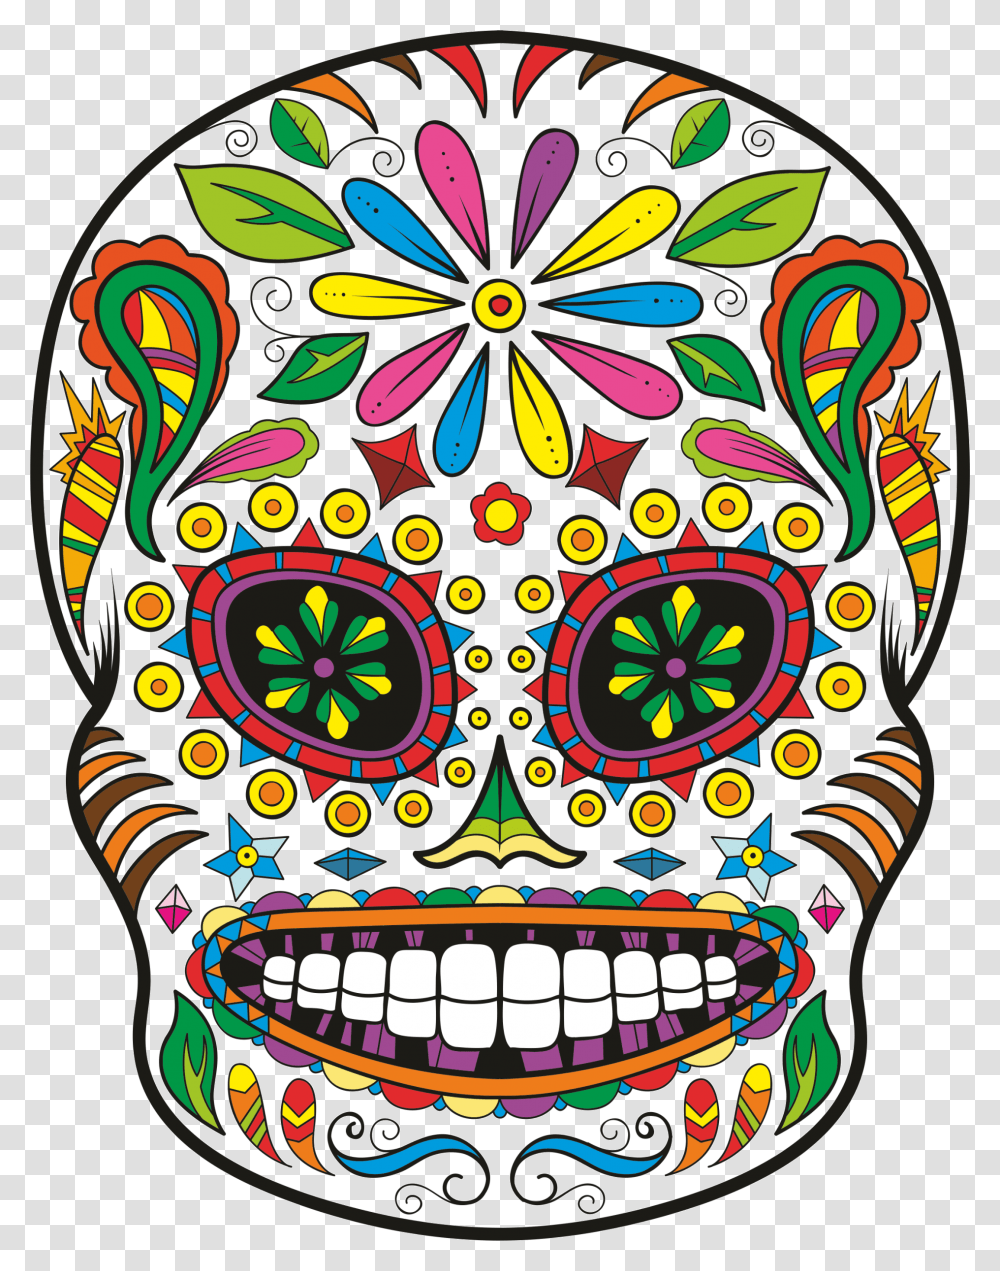 Calavera Day Of The Dead Skull Sticker Decal Colorful Sugar Skull Designs, Doodle, Drawing Transparent Png